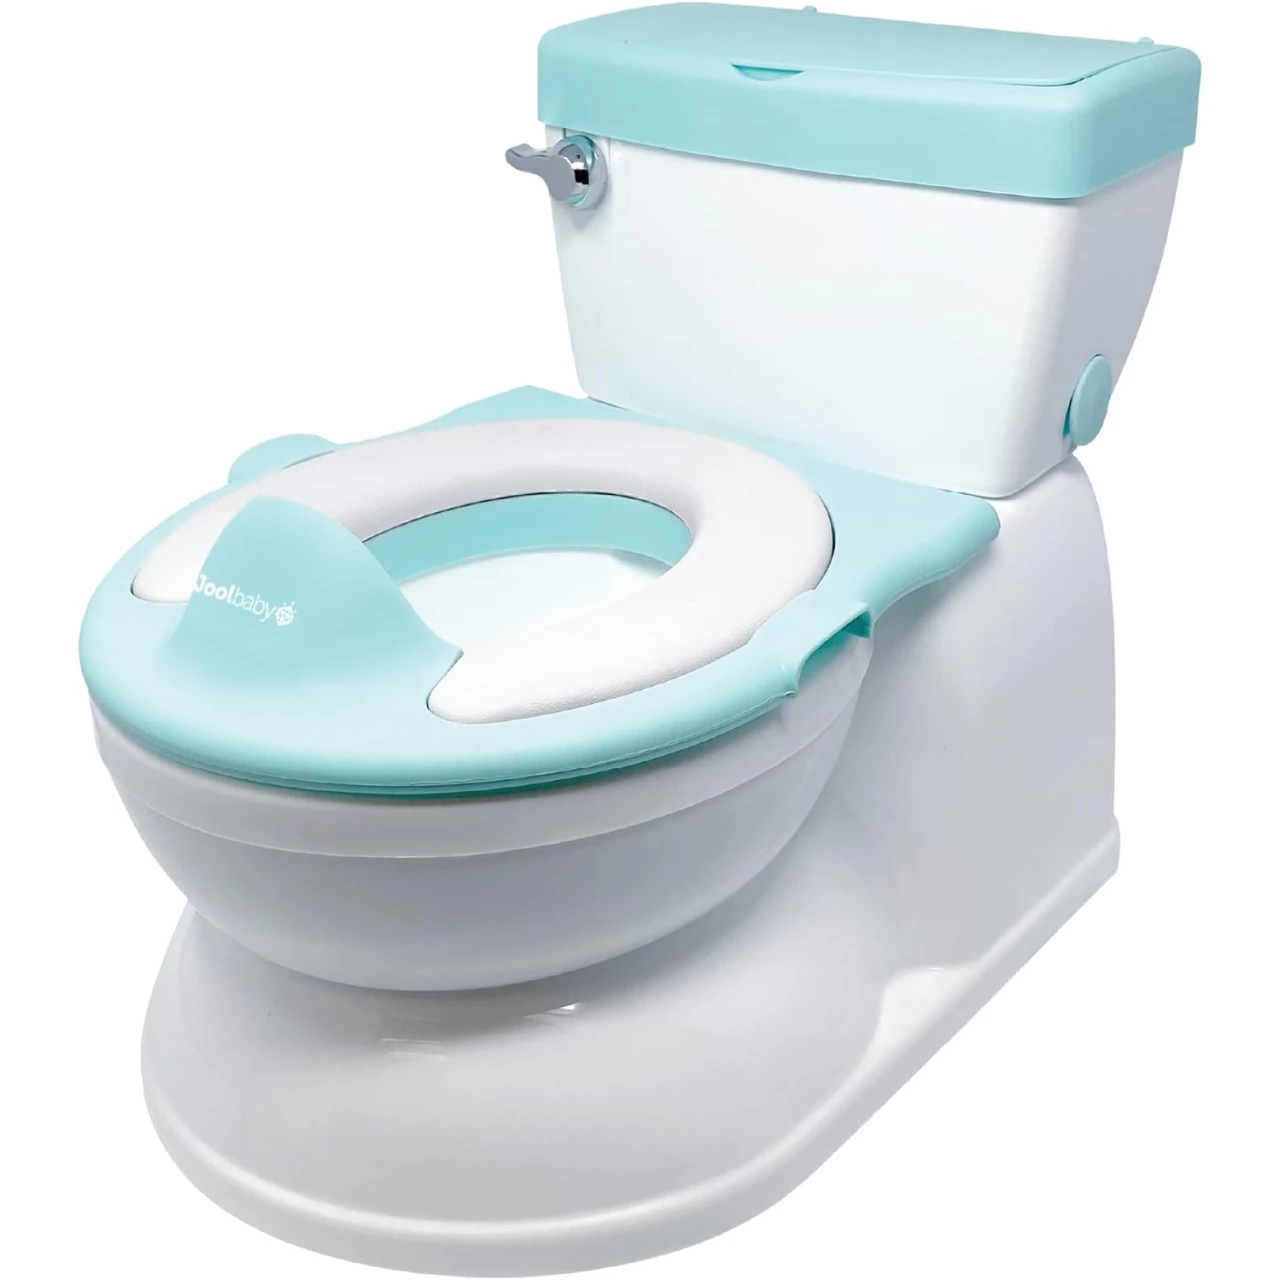 Real Feel Potty with Wipes Storage, Transition Seat &amp; Disposable Liners - Realistic Toilet - Easy to Clean &amp; Assemble - Jool Baby (Aqua)